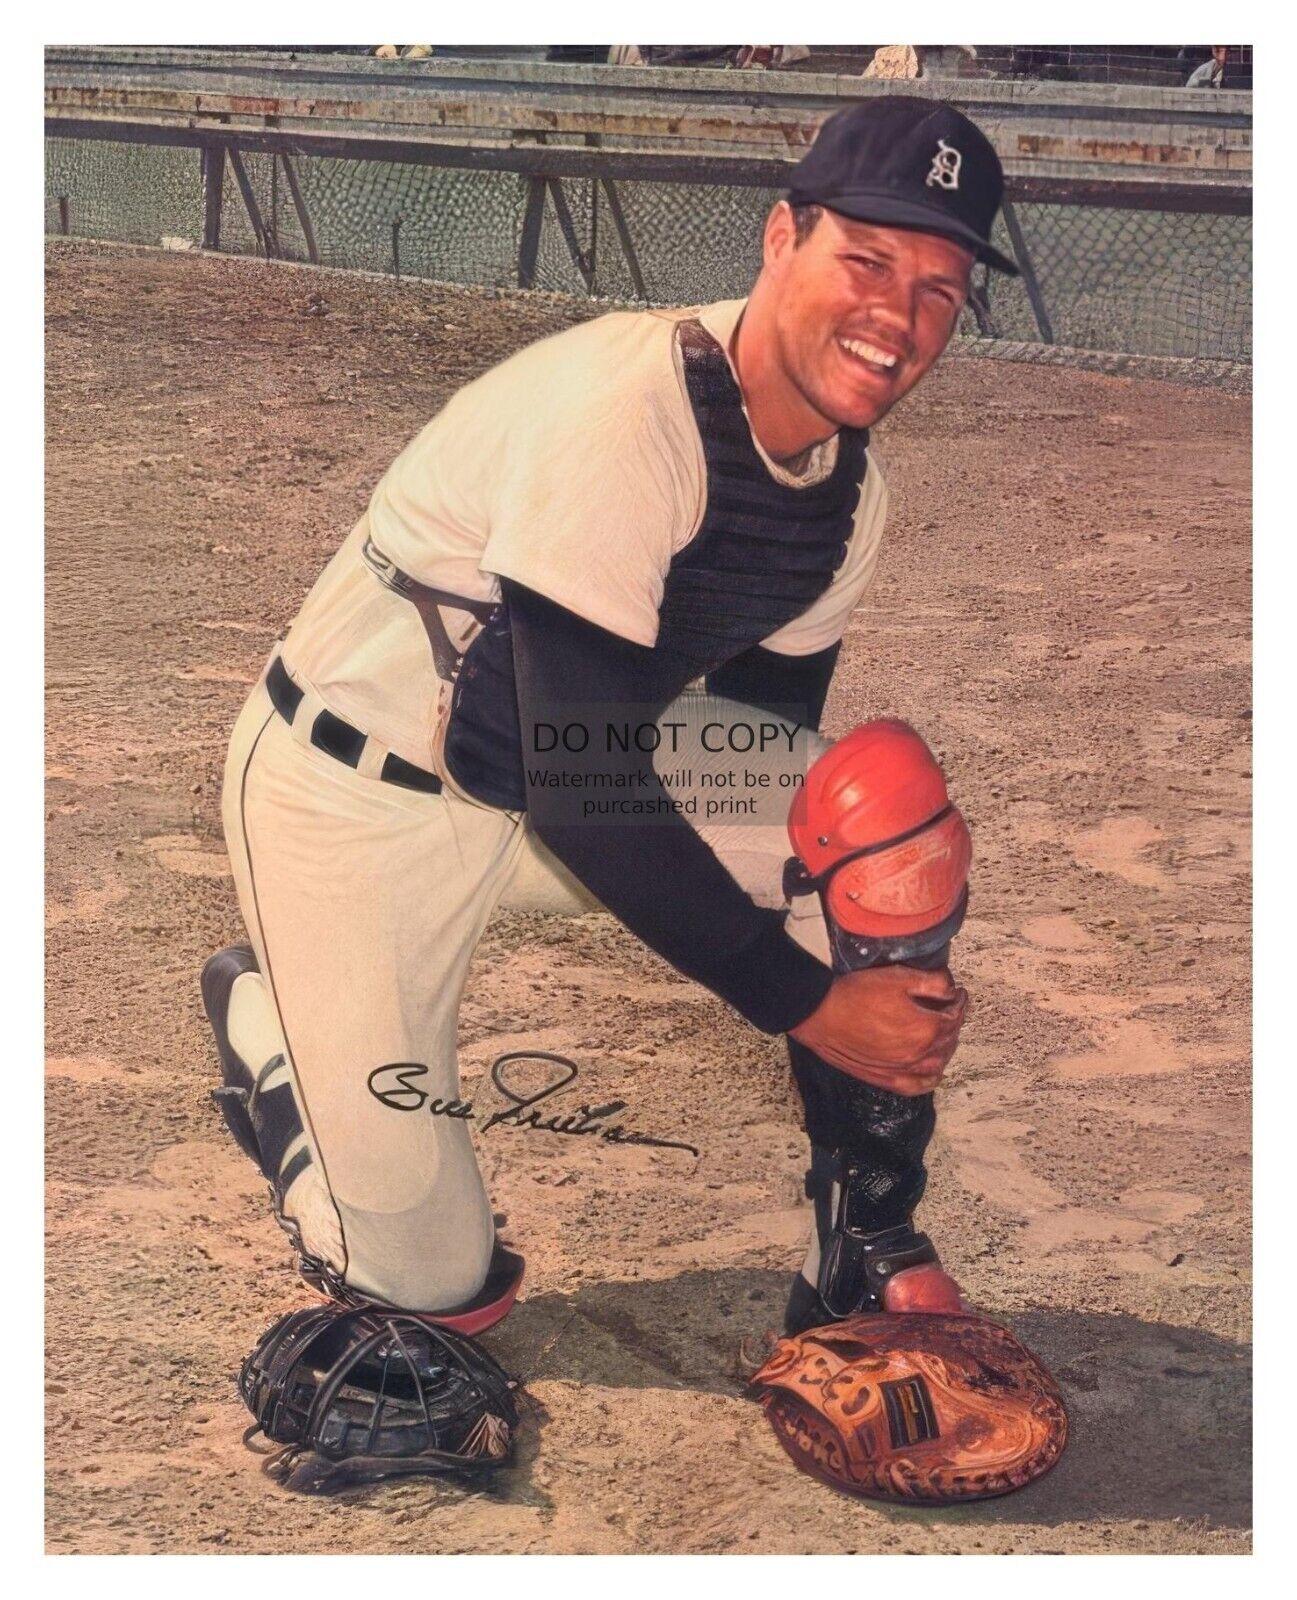 BILL FREEHAN DETROIT TIGERS CATCHER 1966 AUTOGRAPHED BAEBALL PLAYER 8X10 PHOTO